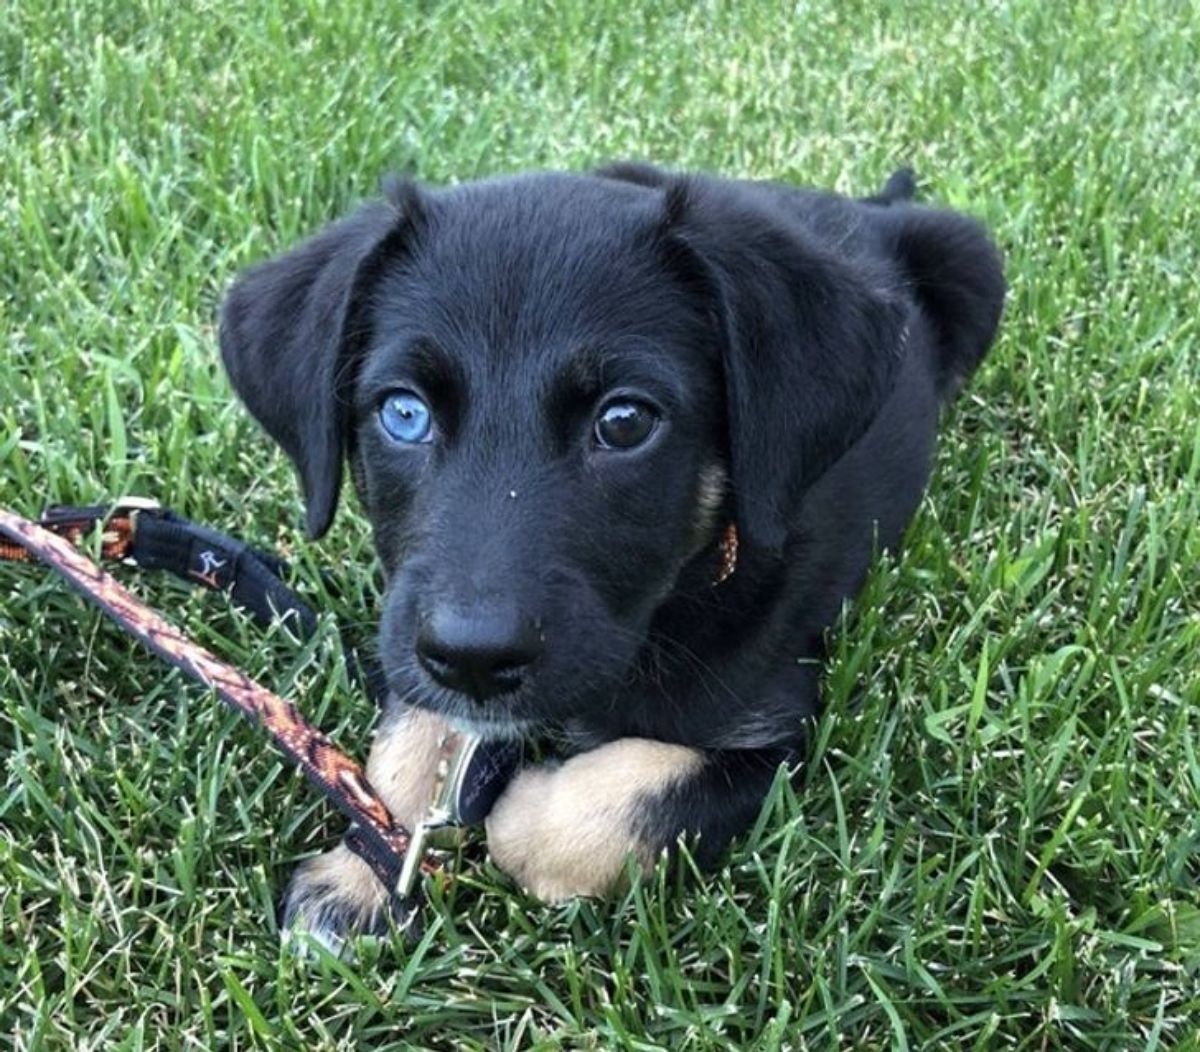 black puppy with brown legs with a blue right eye and black left eye laying on grass